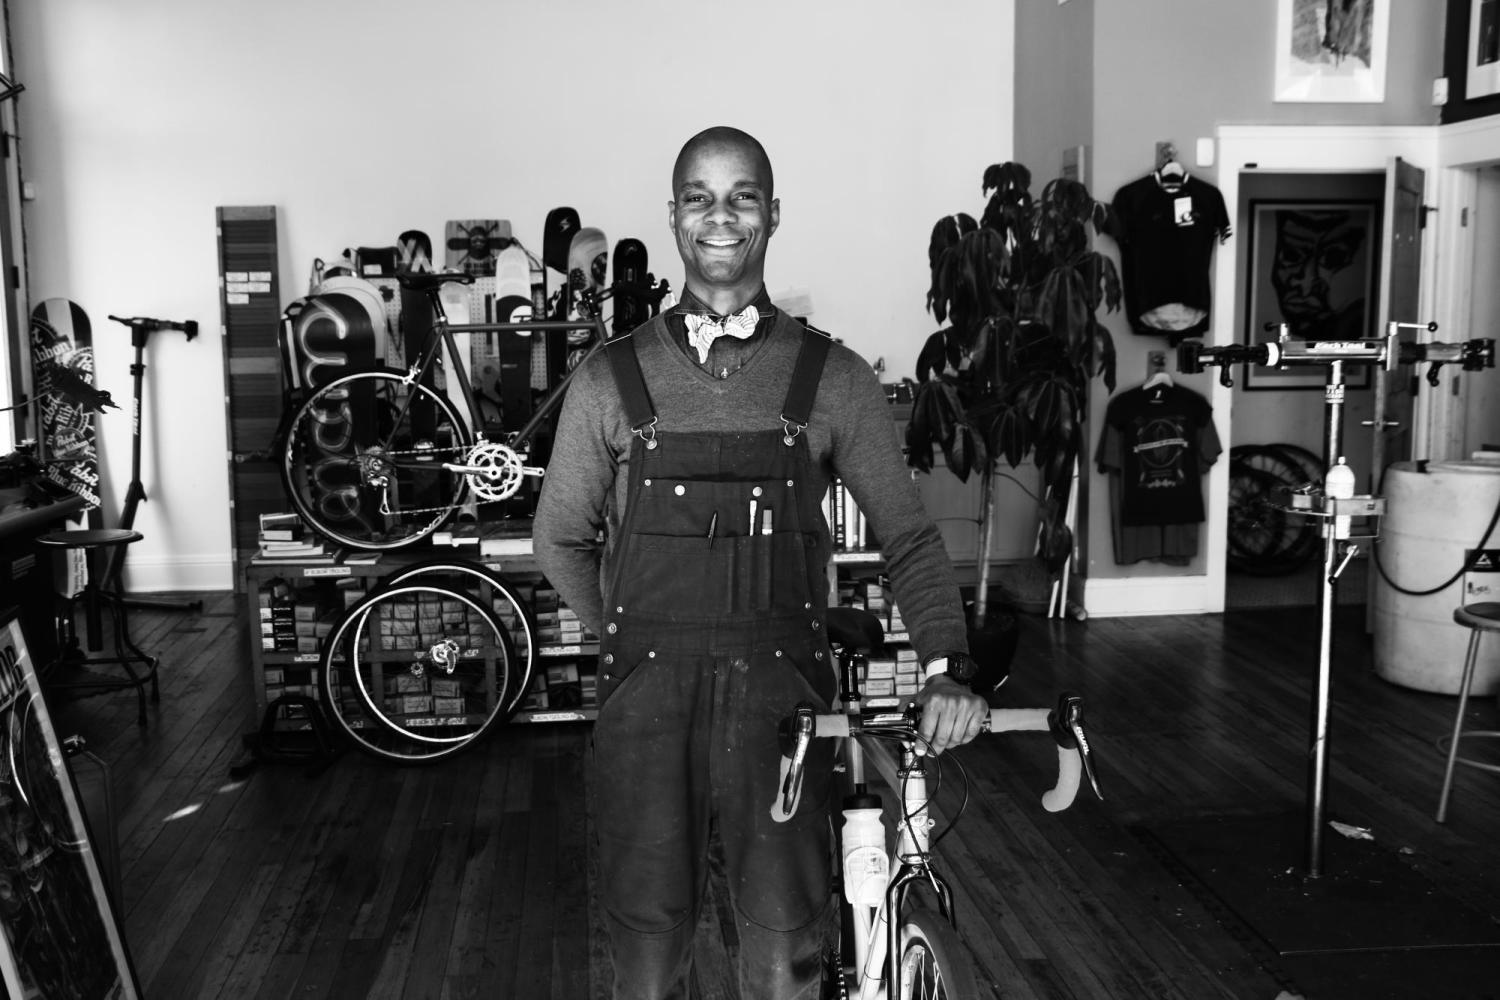 Gregory Crichlow in his bike shop called Chocolate Spokes